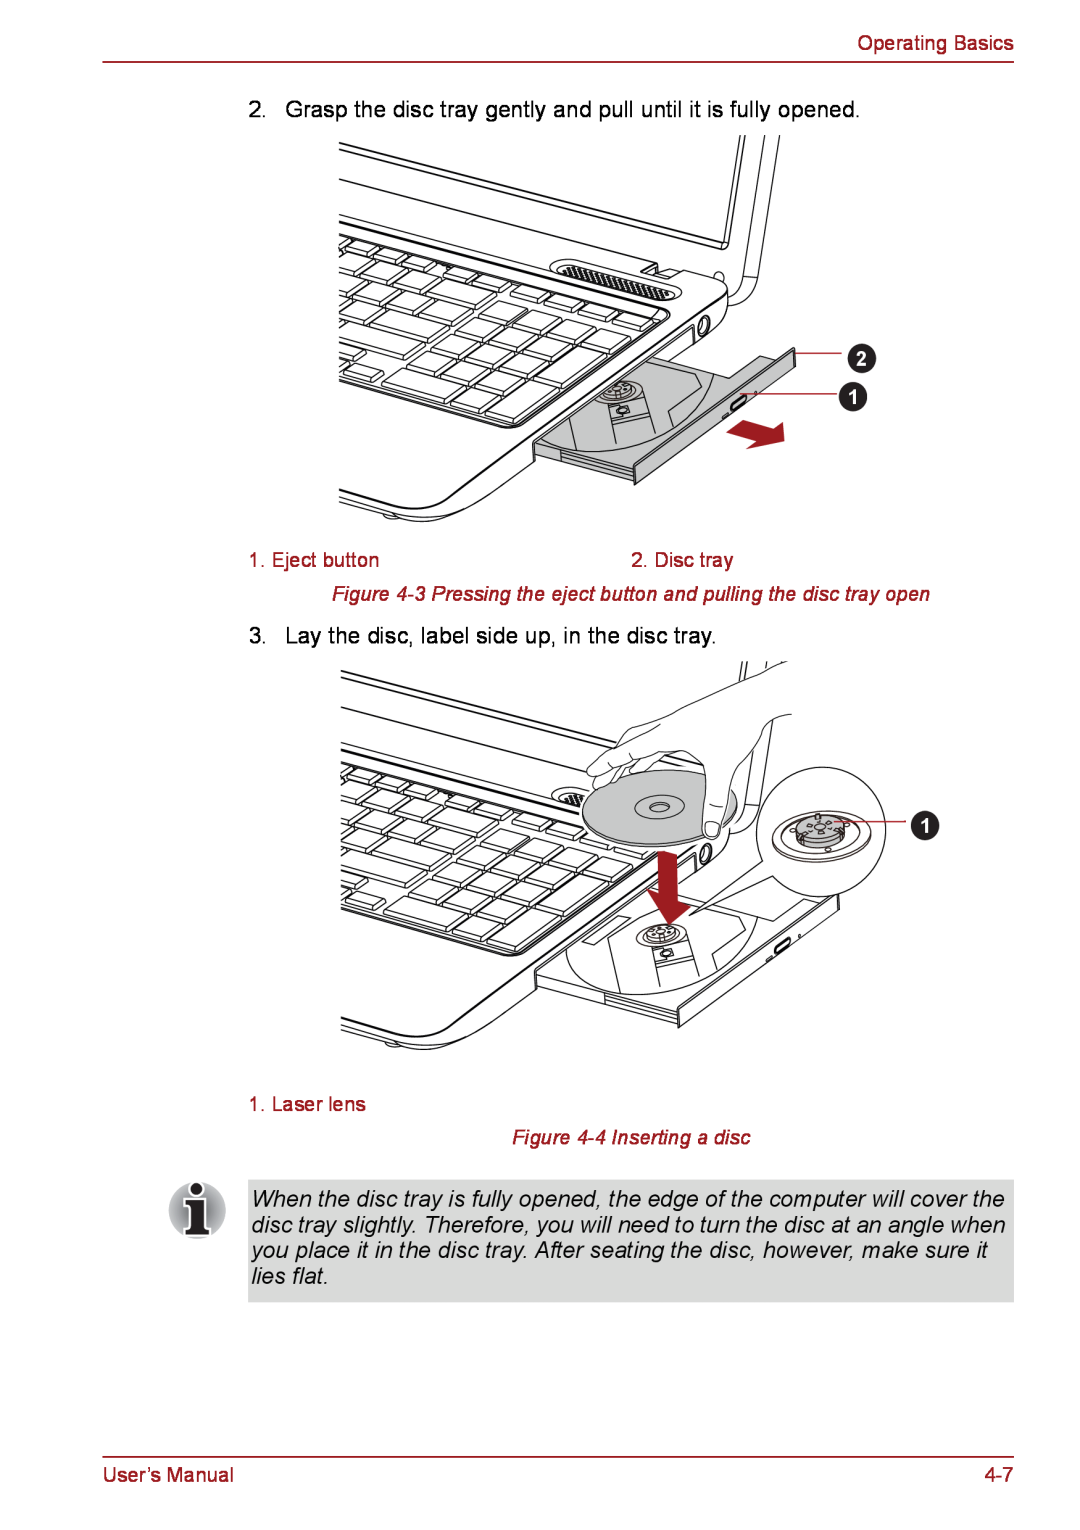 Toshiba PSC08U-02D01D user manual Grasp the disc tray gently and pull until it is fully opened, 4 Inserting a disc 